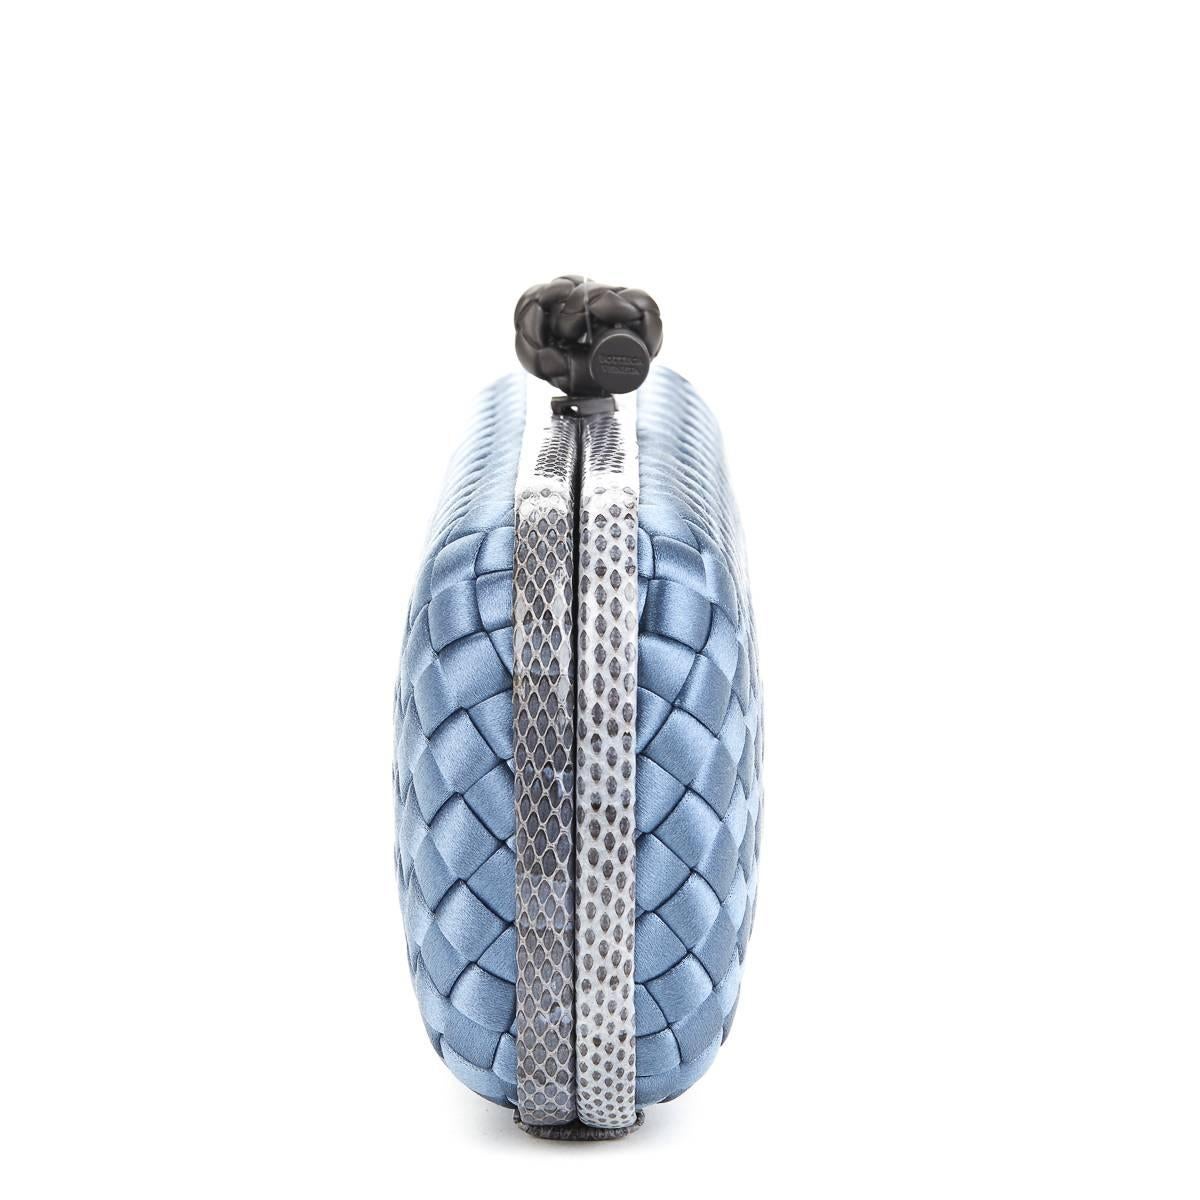 BOTTEGA VENETA
Glaucous Blue Woven Satin & Snakeskin Trim Long Knot Clutch

This BOTTEGA VENETA Long Knot Clutch is in Excellent Pre-Owned Condition accompanied by Care Card. Circa 2000. Primarily made from Satin complimented by Gunmetal